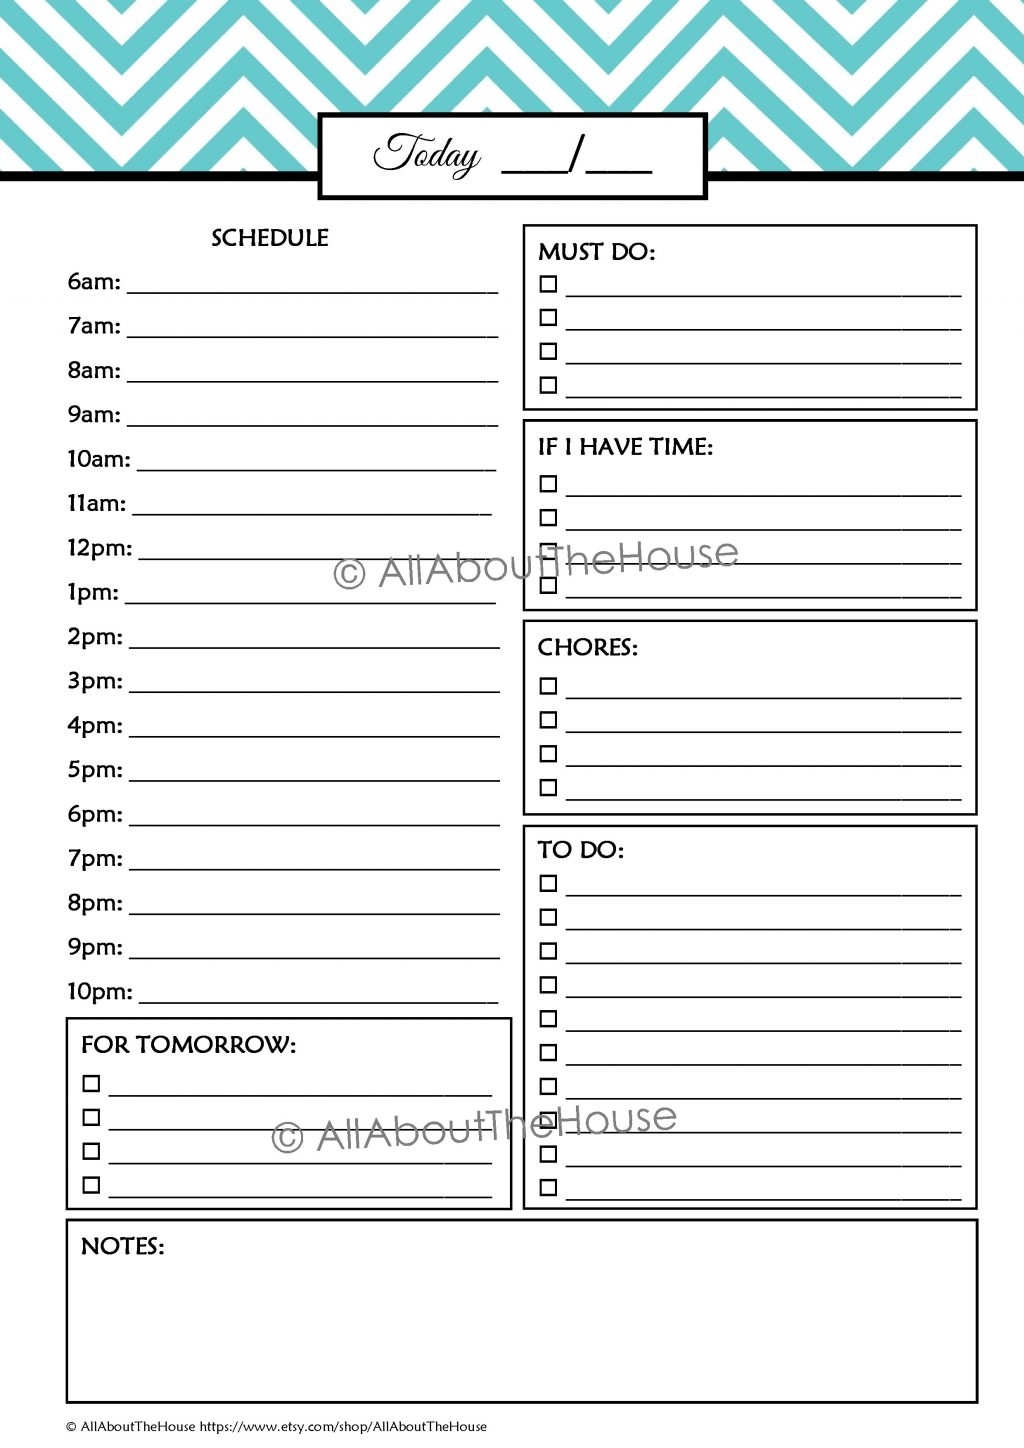 Editable Daily Schedule Template Large Blank Spider Plan Holidays within Large Blank Editable Spider Plan Template